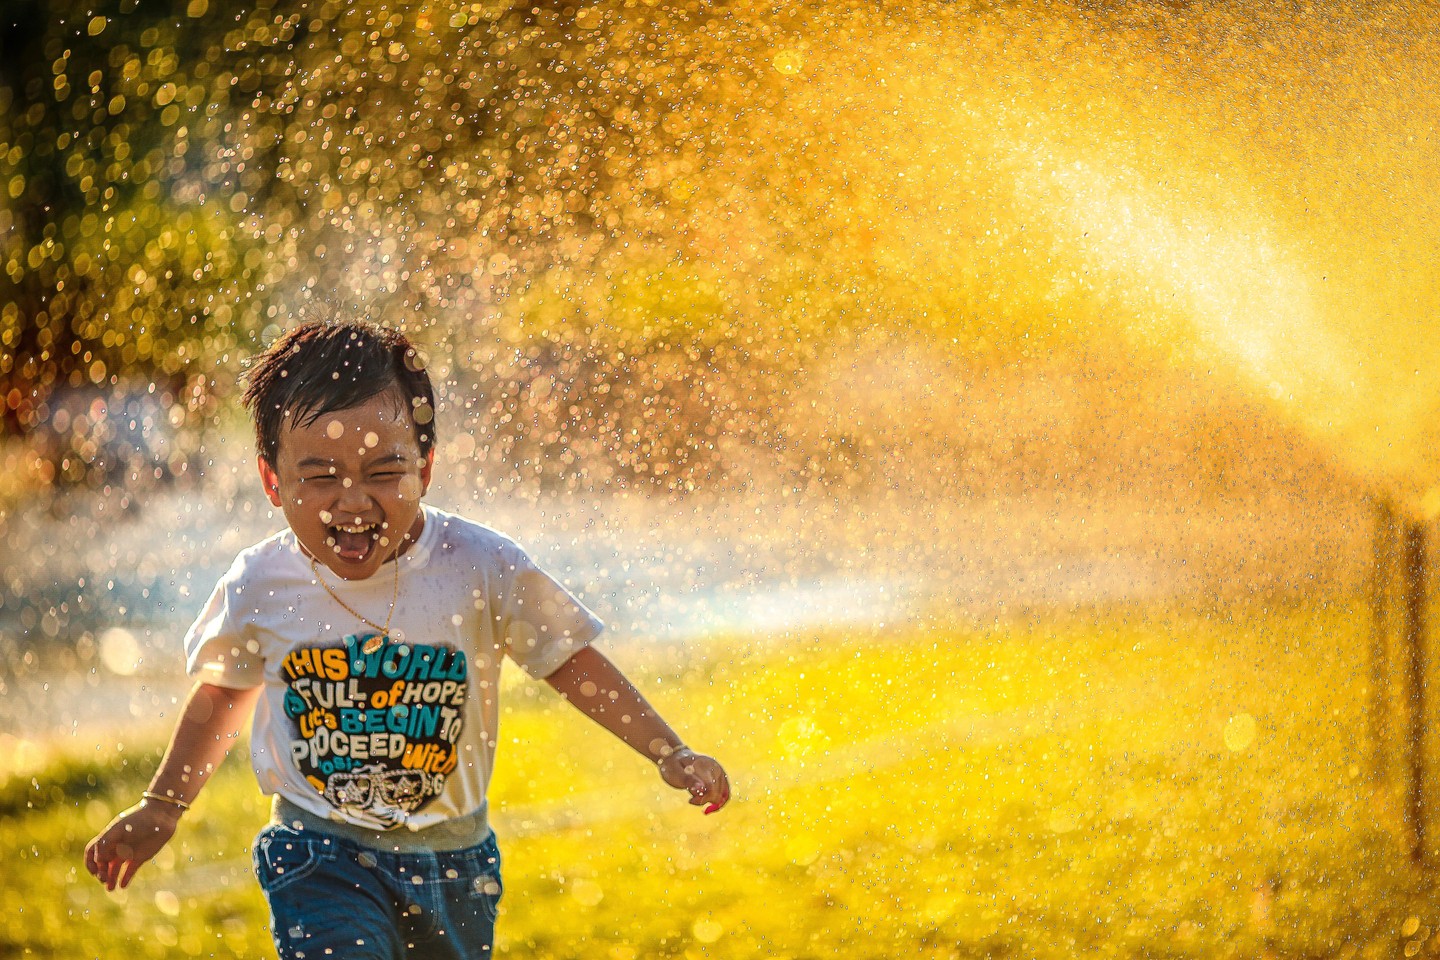 a_young_boy_running_through_a_sprinkle_of_water - ©phammi